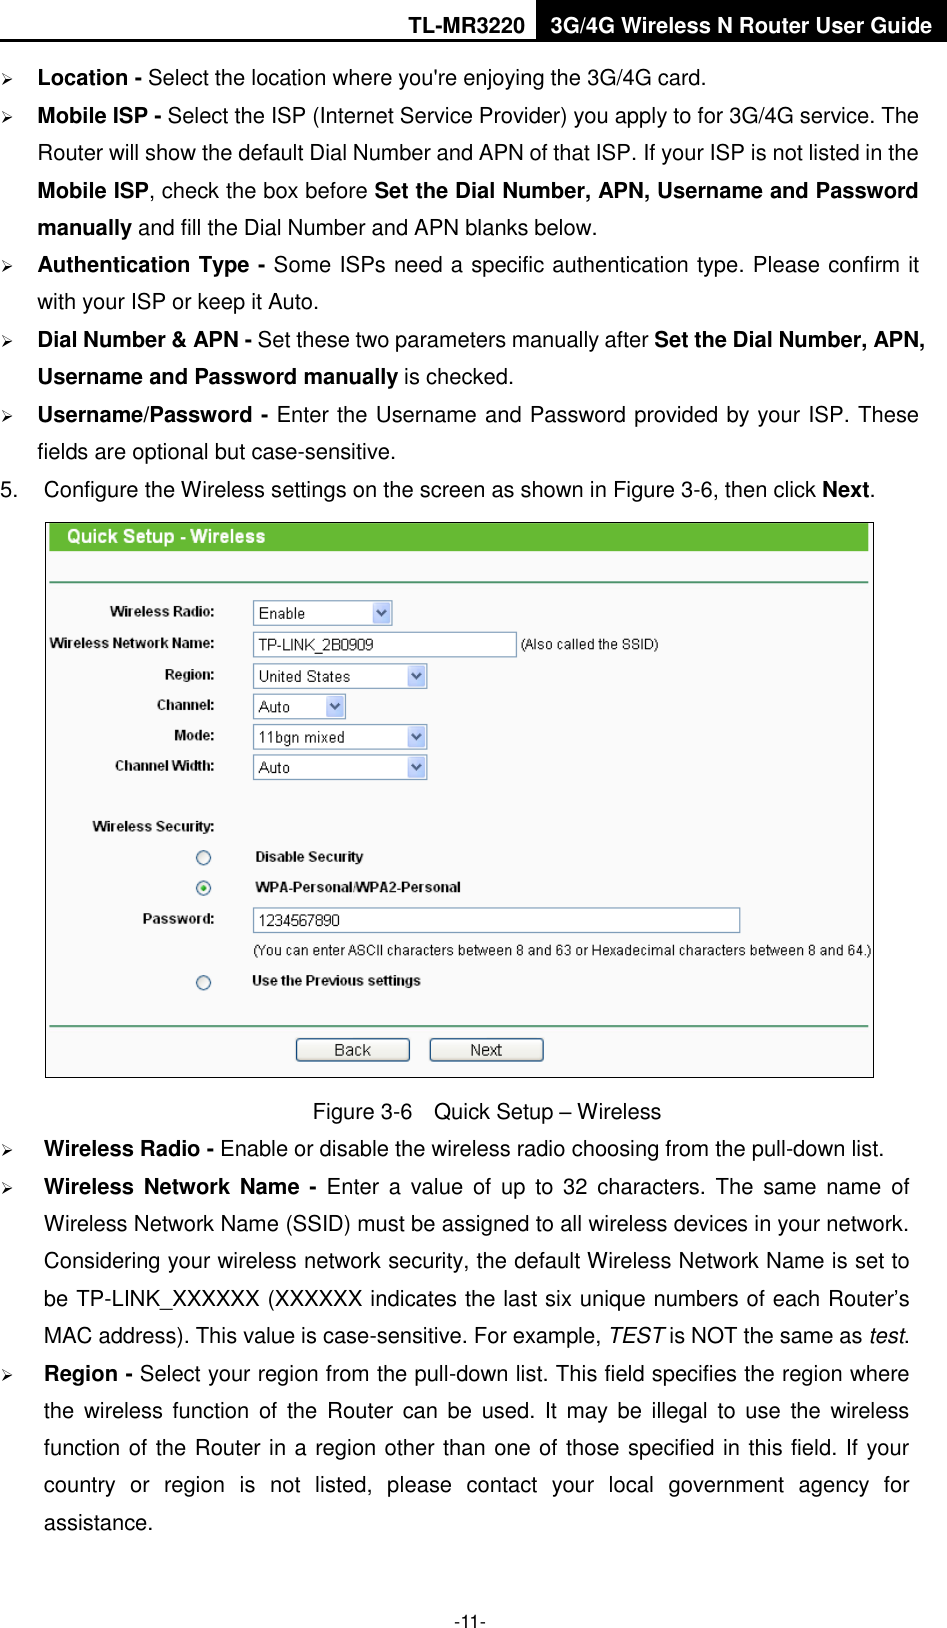 TL-MR3220 3G/4G Wireless N Router User Guide  -11-  Location - Select the location where you&apos;re enjoying the 3G/4G card.  Mobile ISP - Select the ISP (Internet Service Provider) you apply to for 3G/4G service. The Router will show the default Dial Number and APN of that ISP. If your ISP is not listed in the Mobile ISP, check the box before Set the Dial Number, APN, Username and Password manually and fill the Dial Number and APN blanks below.  Authentication Type - Some ISPs need a specific authentication type. Please confirm it with your ISP or keep it Auto.  Dial Number &amp; APN - Set these two parameters manually after Set the Dial Number, APN, Username and Password manually is checked.    Username/Password - Enter the Username and Password provided by your ISP. These fields are optional but case-sensitive. 5.  Configure the Wireless settings on the screen as shown in Figure 3-6, then click Next.  Figure 3-6  Quick Setup – Wireless  Wireless Radio - Enable or disable the wireless radio choosing from the pull-down list.    Wireless Network  Name  -  Enter  a  value  of  up  to  32  characters.  The  same  name  of Wireless Network Name (SSID) must be assigned to all wireless devices in your network. Considering your wireless network security, the default Wireless Network Name is set to be TP-LINK_XXXXXX (XXXXXX indicates the last six unique numbers of each Router’s MAC address). This value is case-sensitive. For example, TEST is NOT the same as test.  Region - Select your region from the pull-down list. This field specifies the region where the  wireless function  of  the  Router  can  be  used. It may be illegal  to use  the wireless function of the Router in a region other than one of those specified in this field. If your country  or  region  is  not  listed,  please  contact  your  local  government  agency  for assistance. 